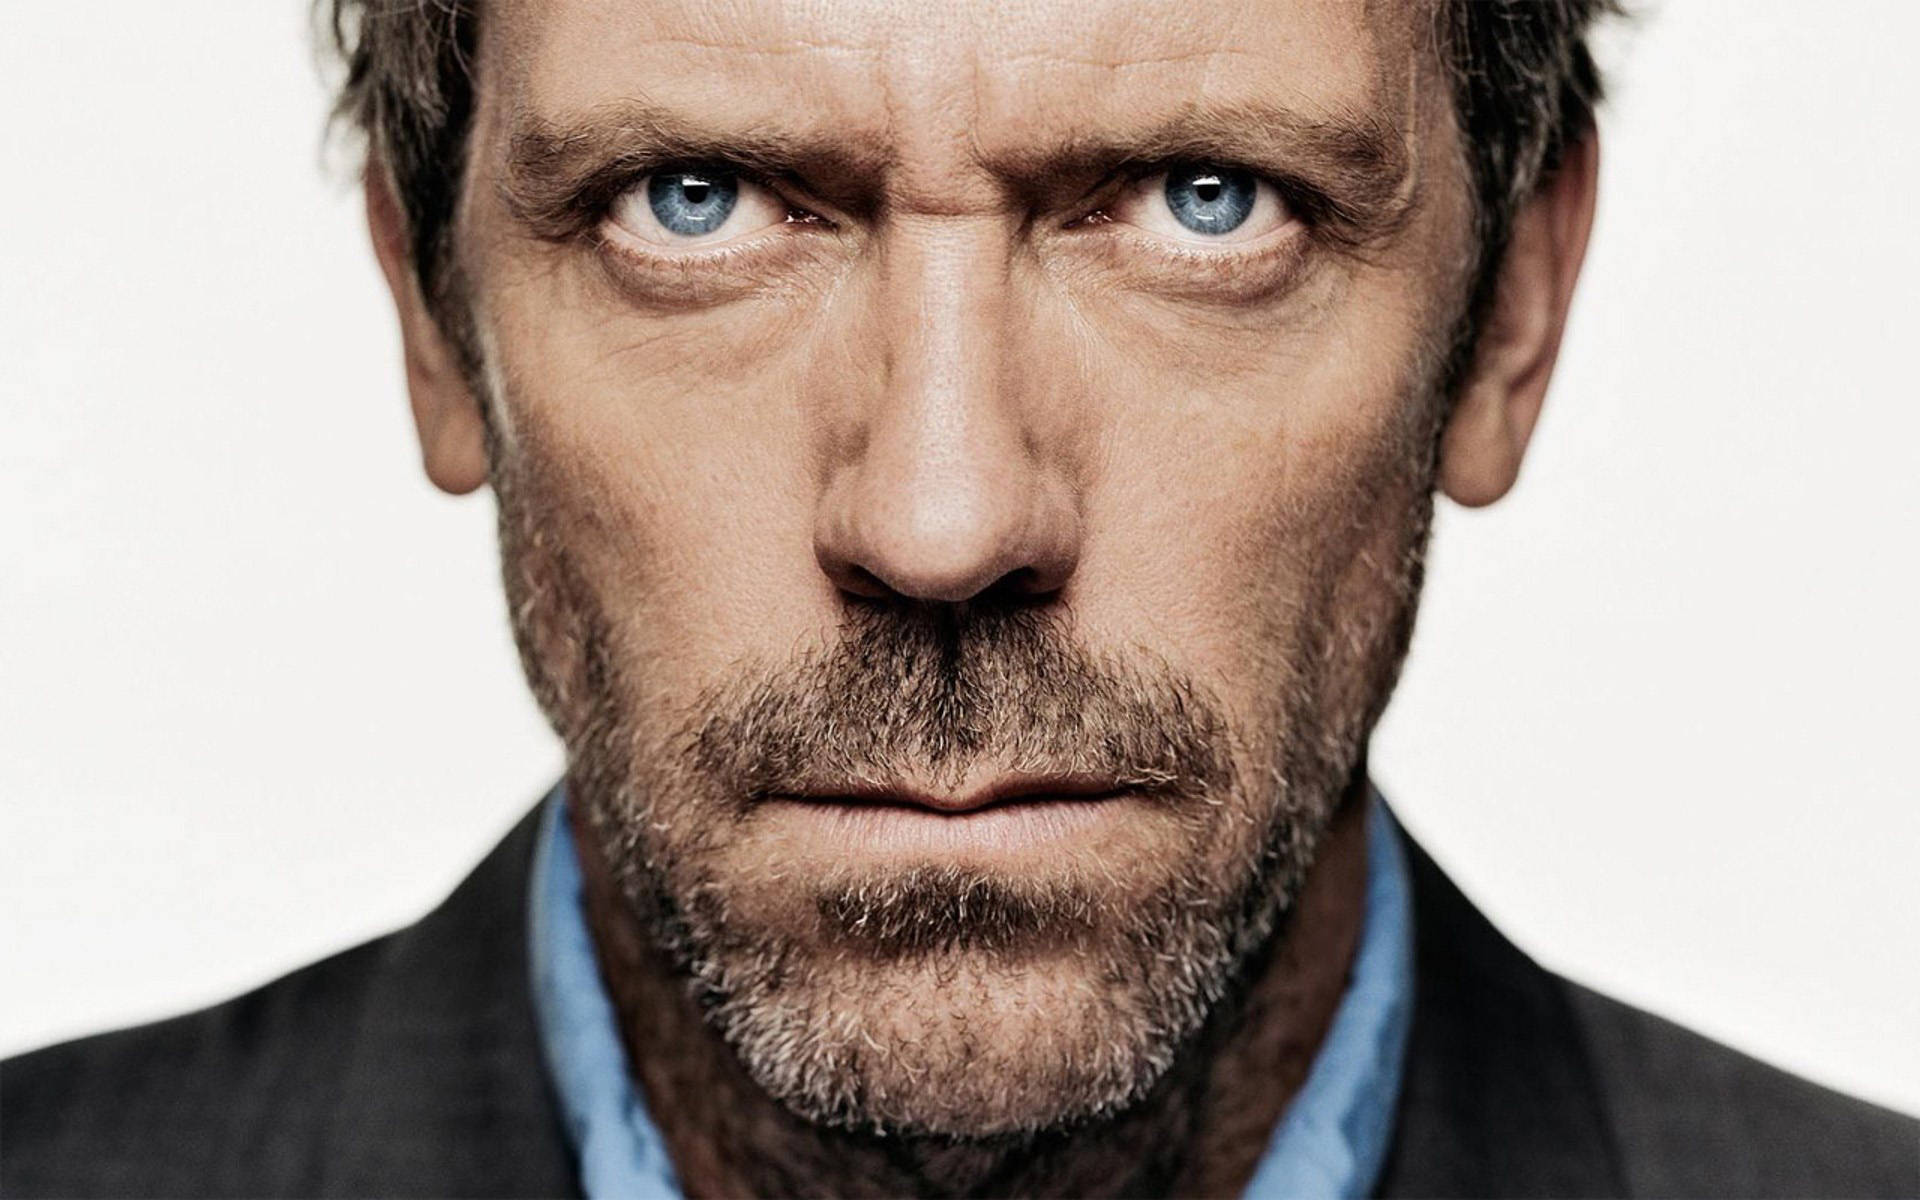 Intense Portrait Of Dr. House From House Md